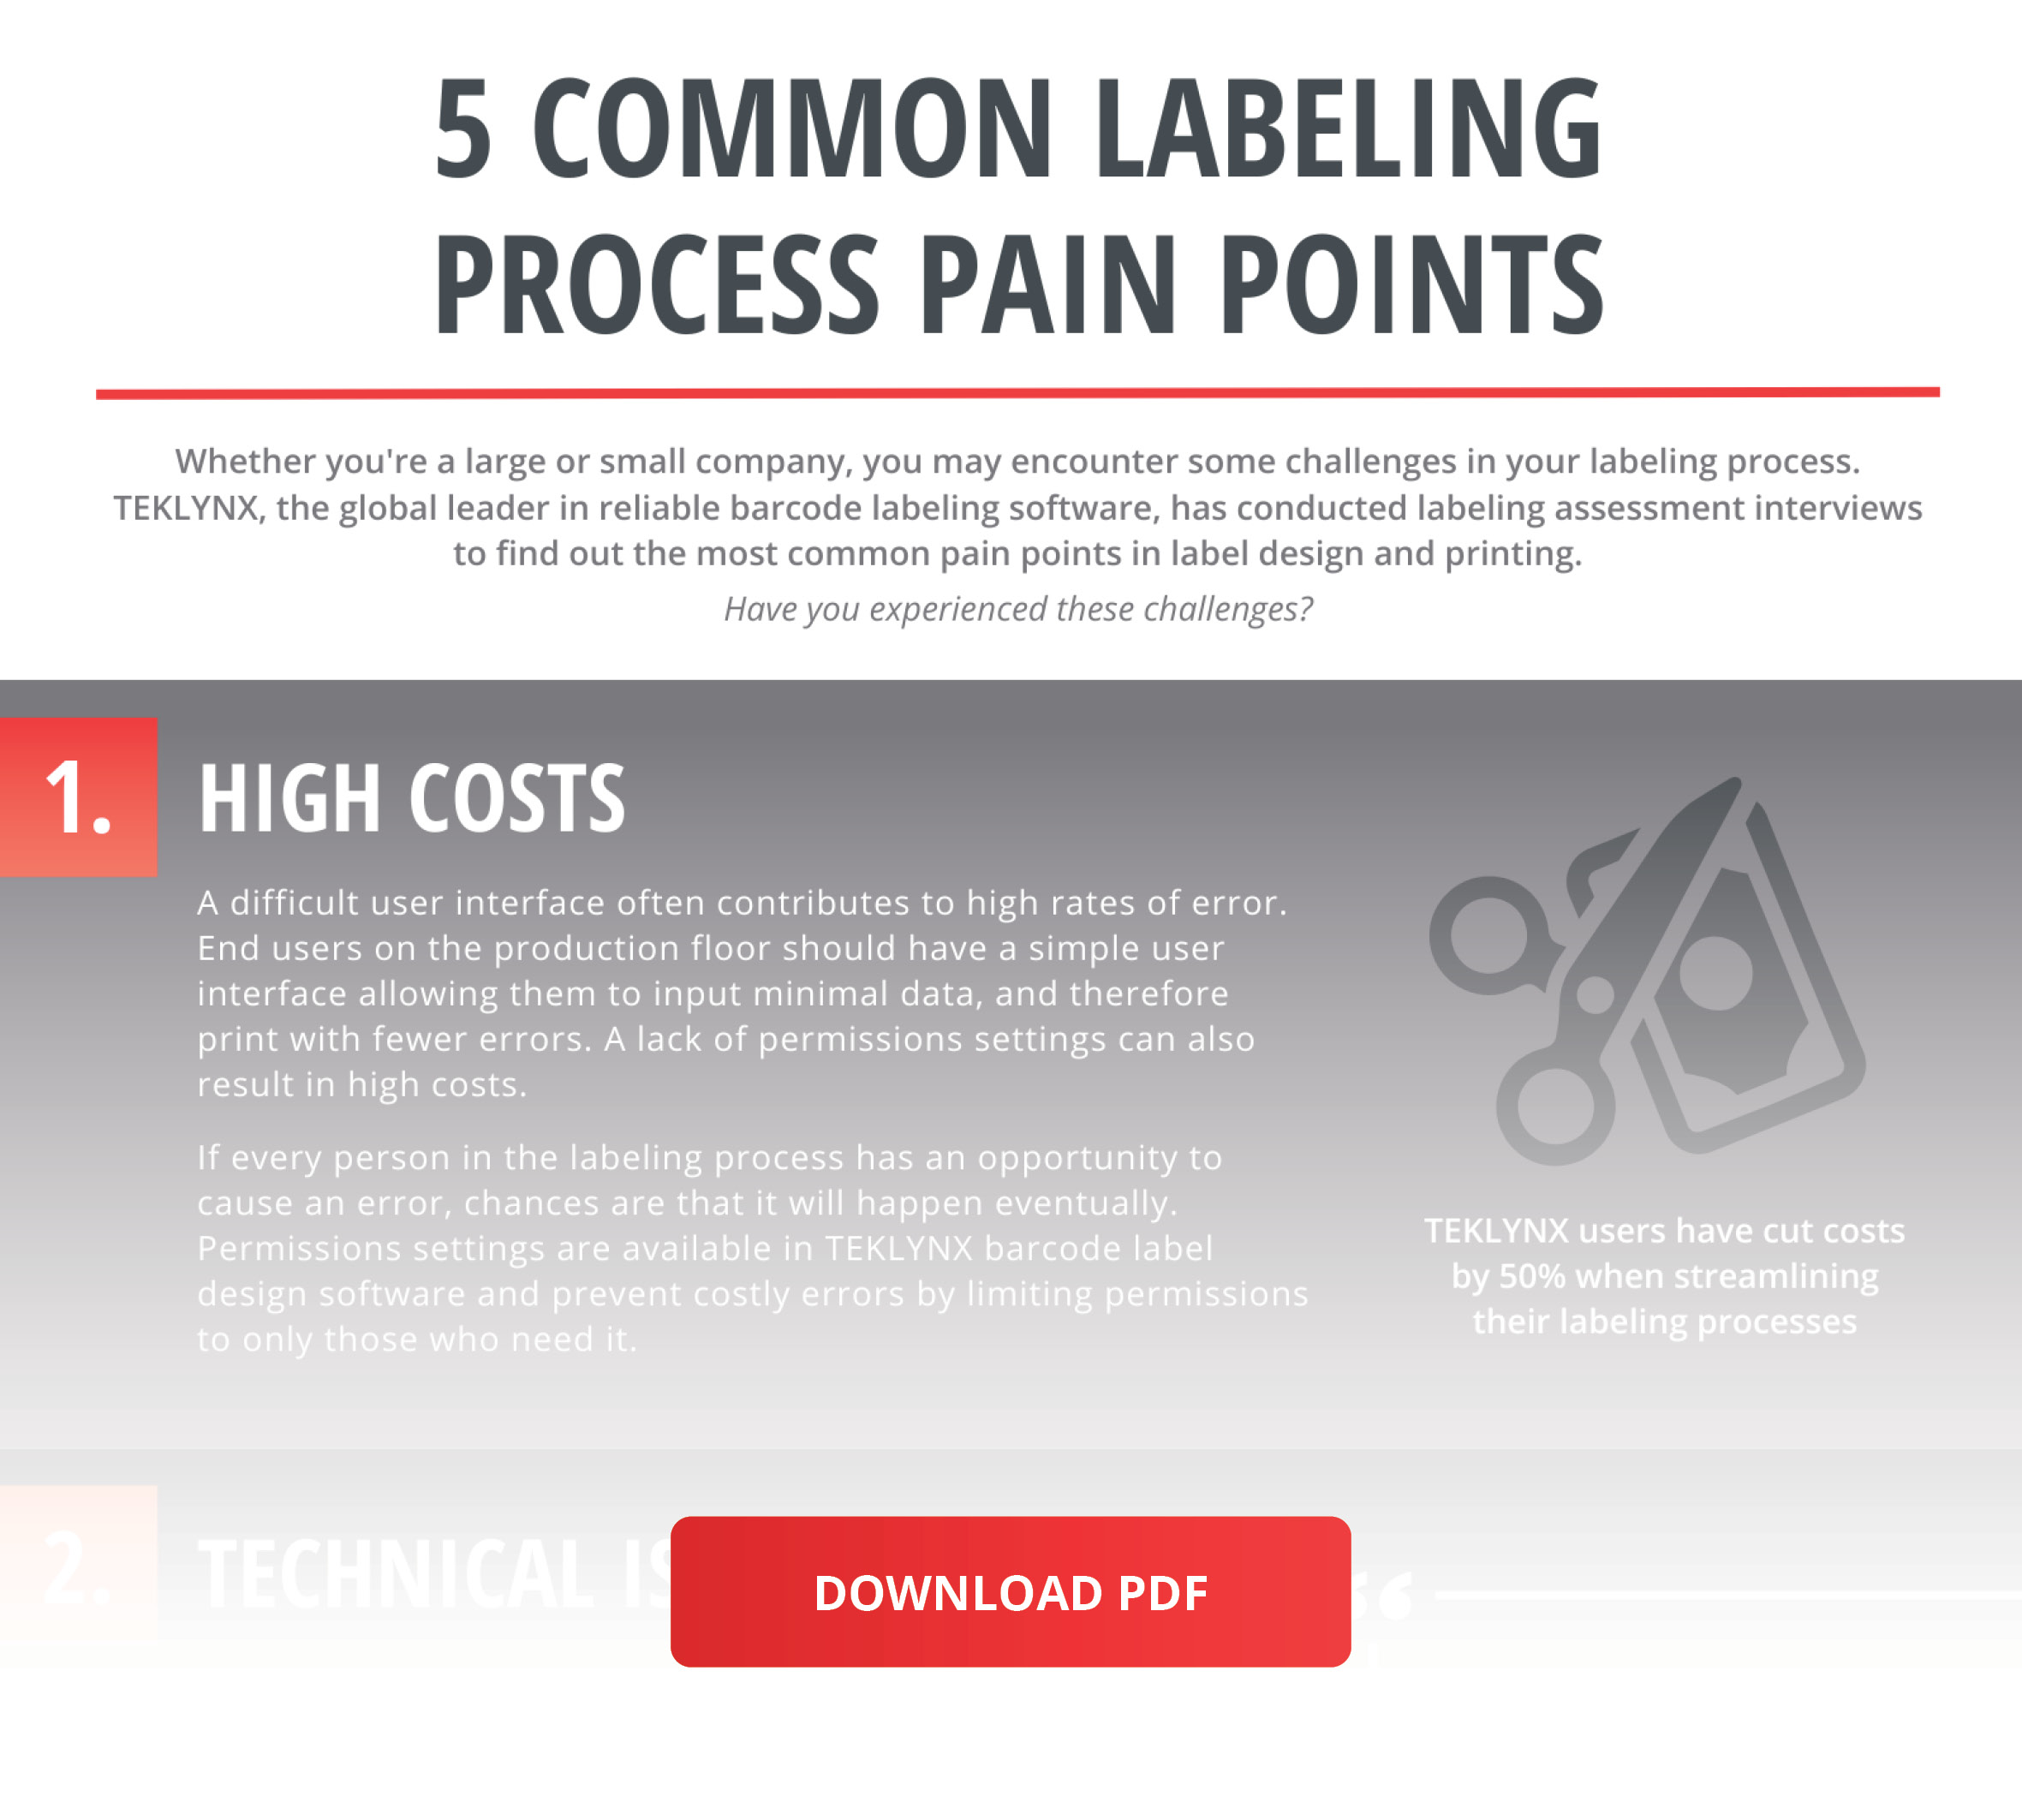 Free Infographic on the Top 5 Most Common Labeling Process Pain Points